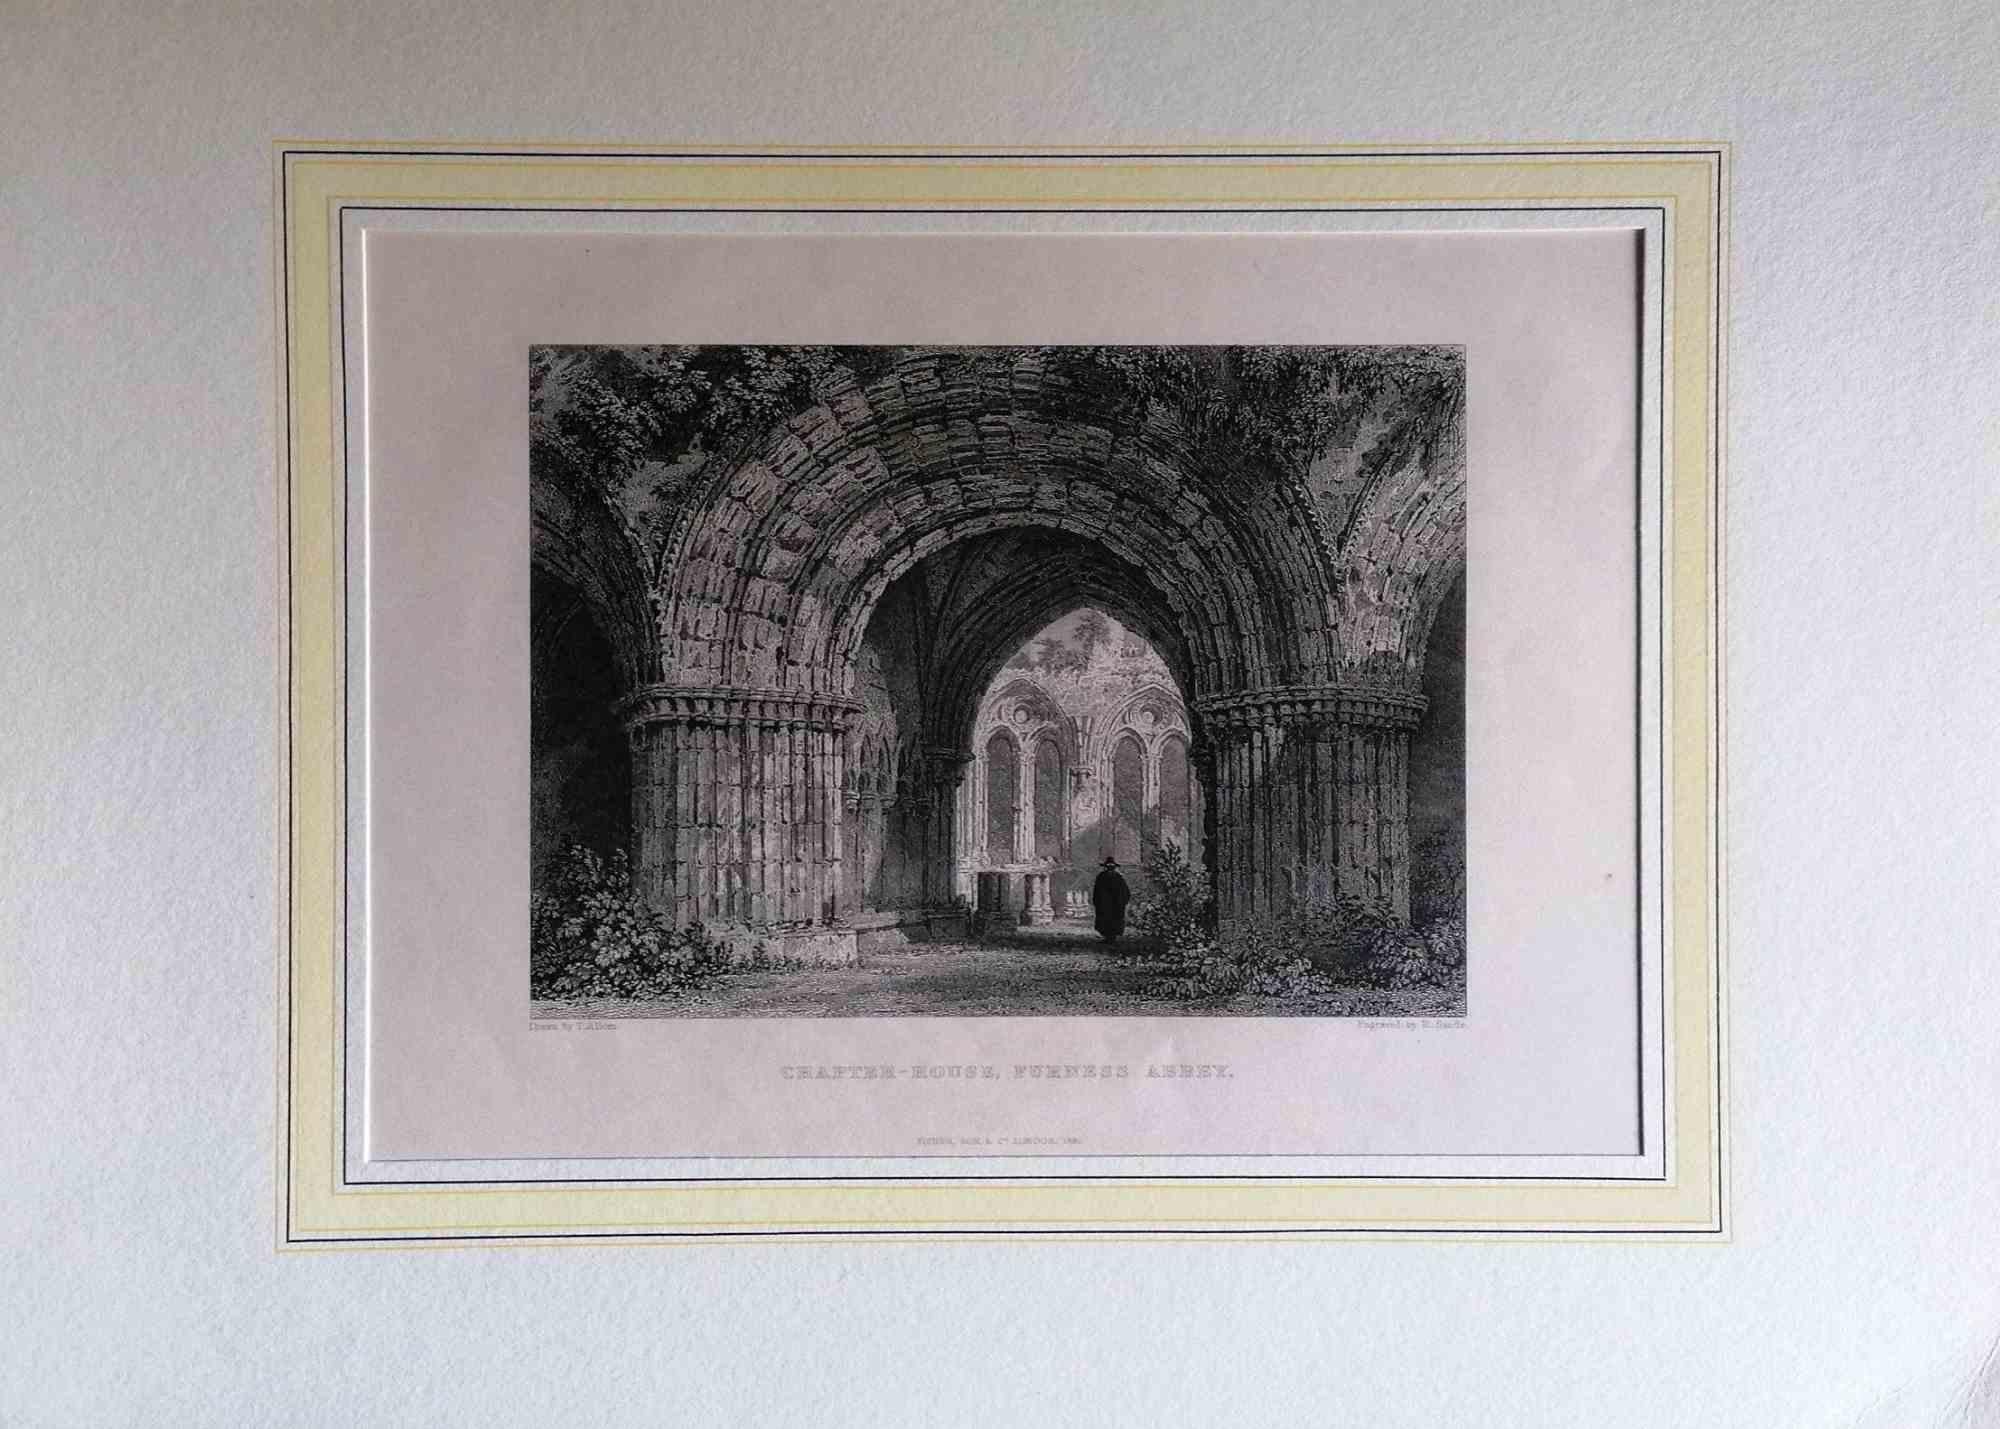 Unknown Landscape Print - Chapter-House, Furness Abbey - Original Lithograph - Mid-19th Century